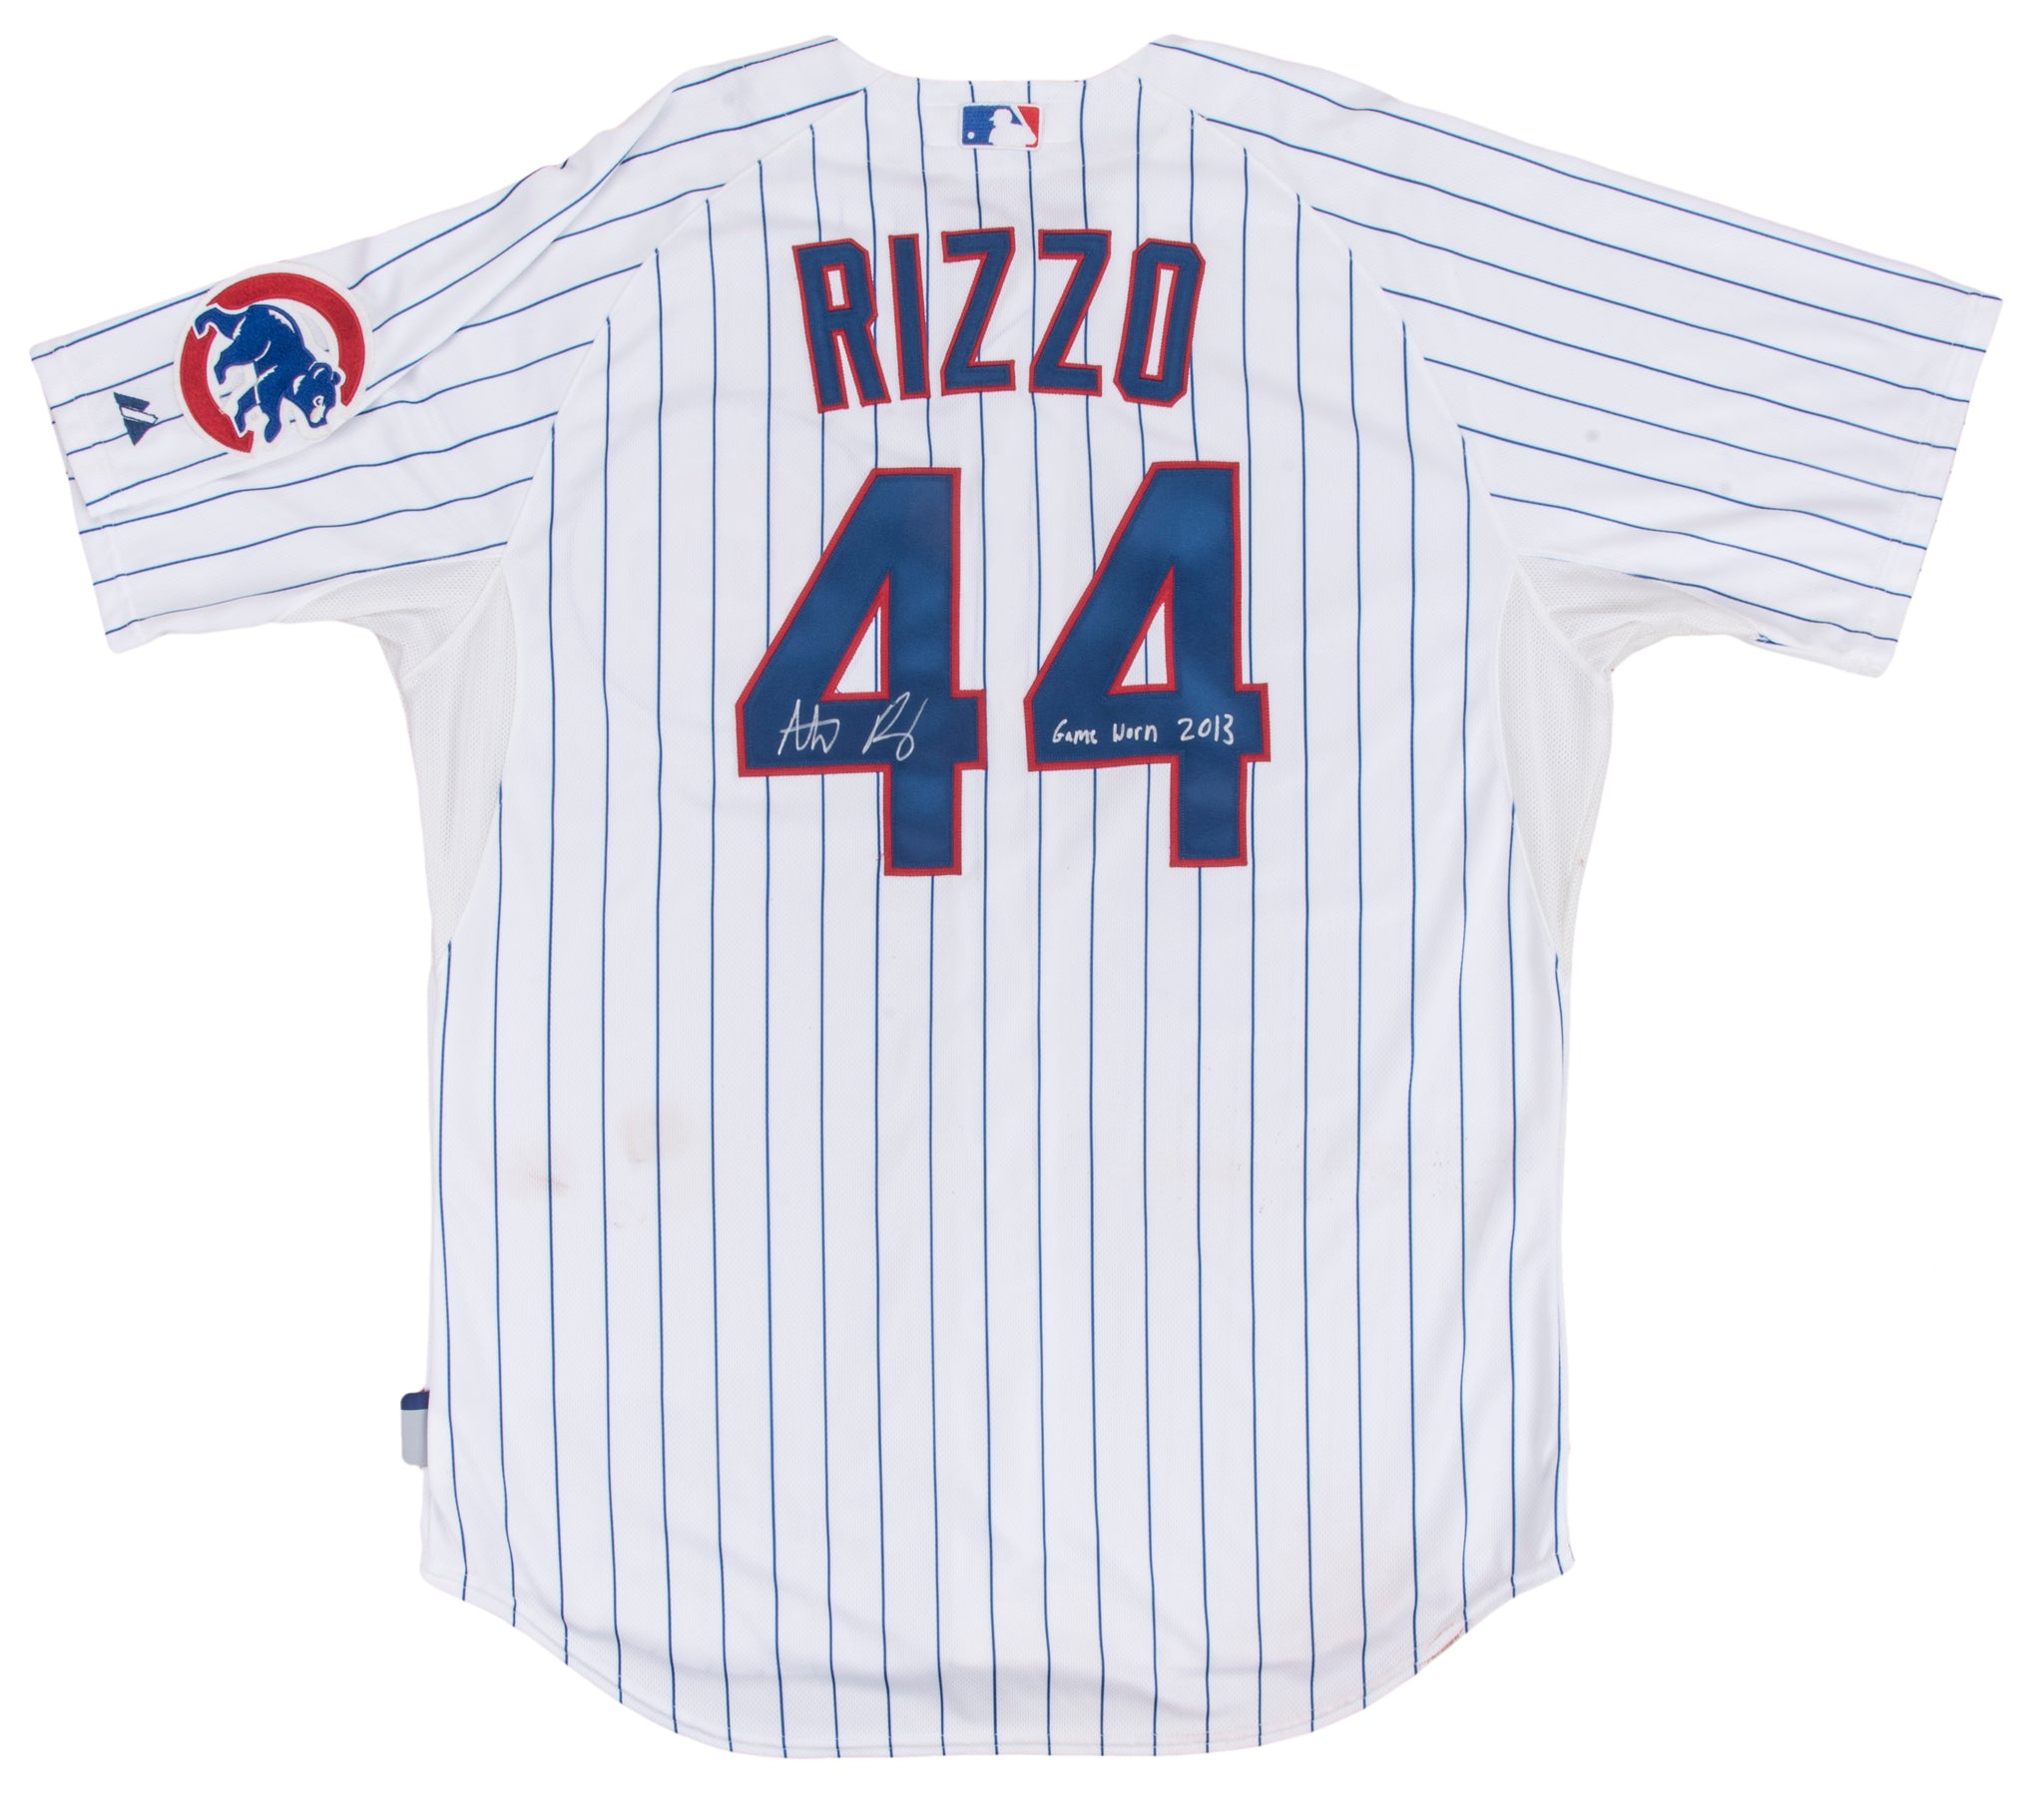 Rizzo refreshed for new season